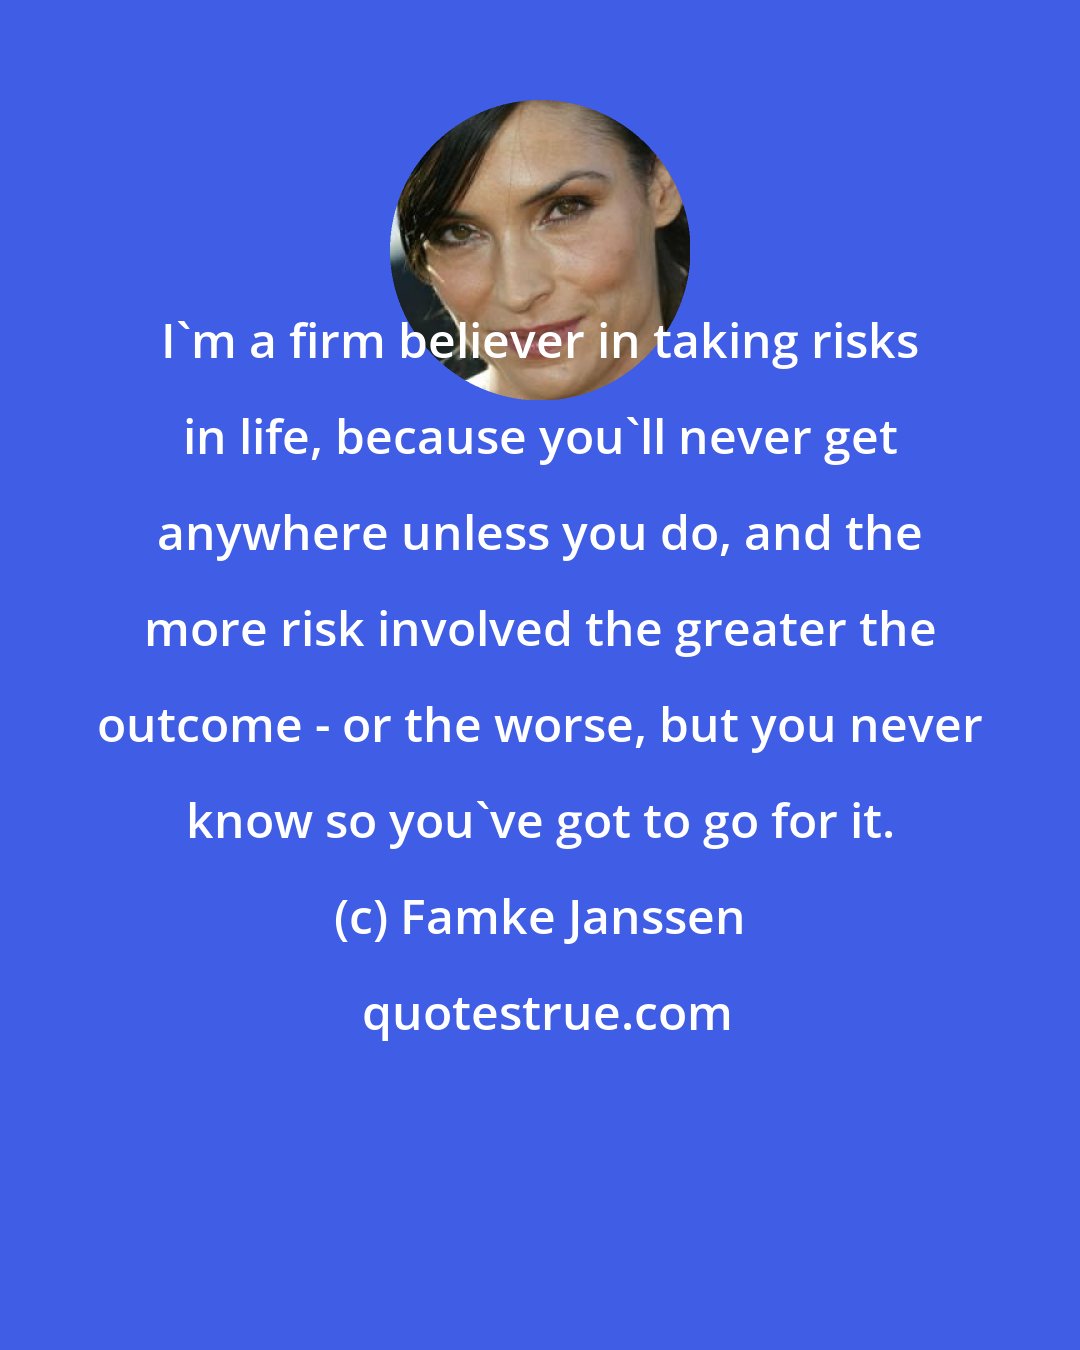 Famke Janssen: I'm a firm believer in taking risks in life, because you'll never get anywhere unless you do, and the more risk involved the greater the outcome - or the worse, but you never know so you've got to go for it.